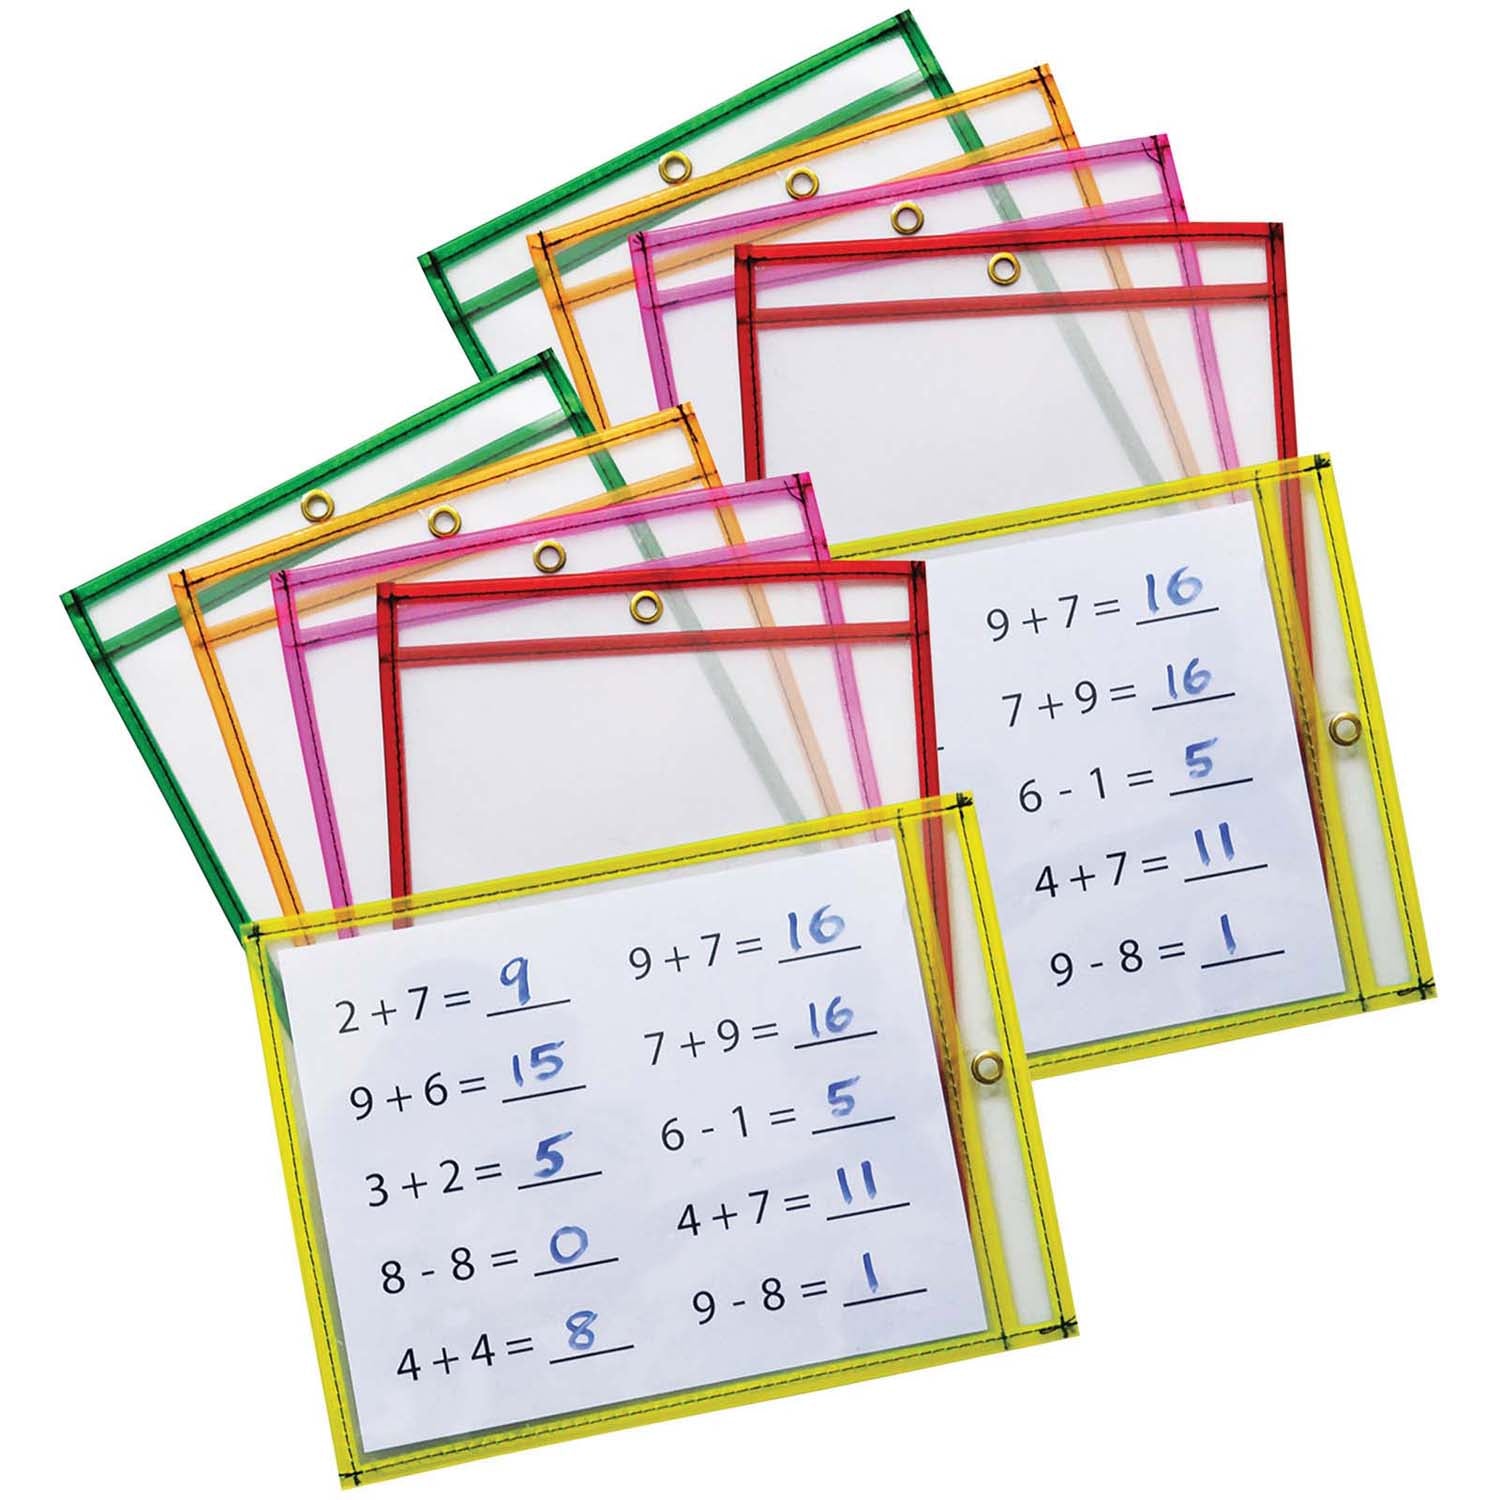 Dry Erase Pockets, 5 Assorted Neon Colors, 9" x 12", 10 Pockets Per Pack, 2 Packs - A1 School Supplies